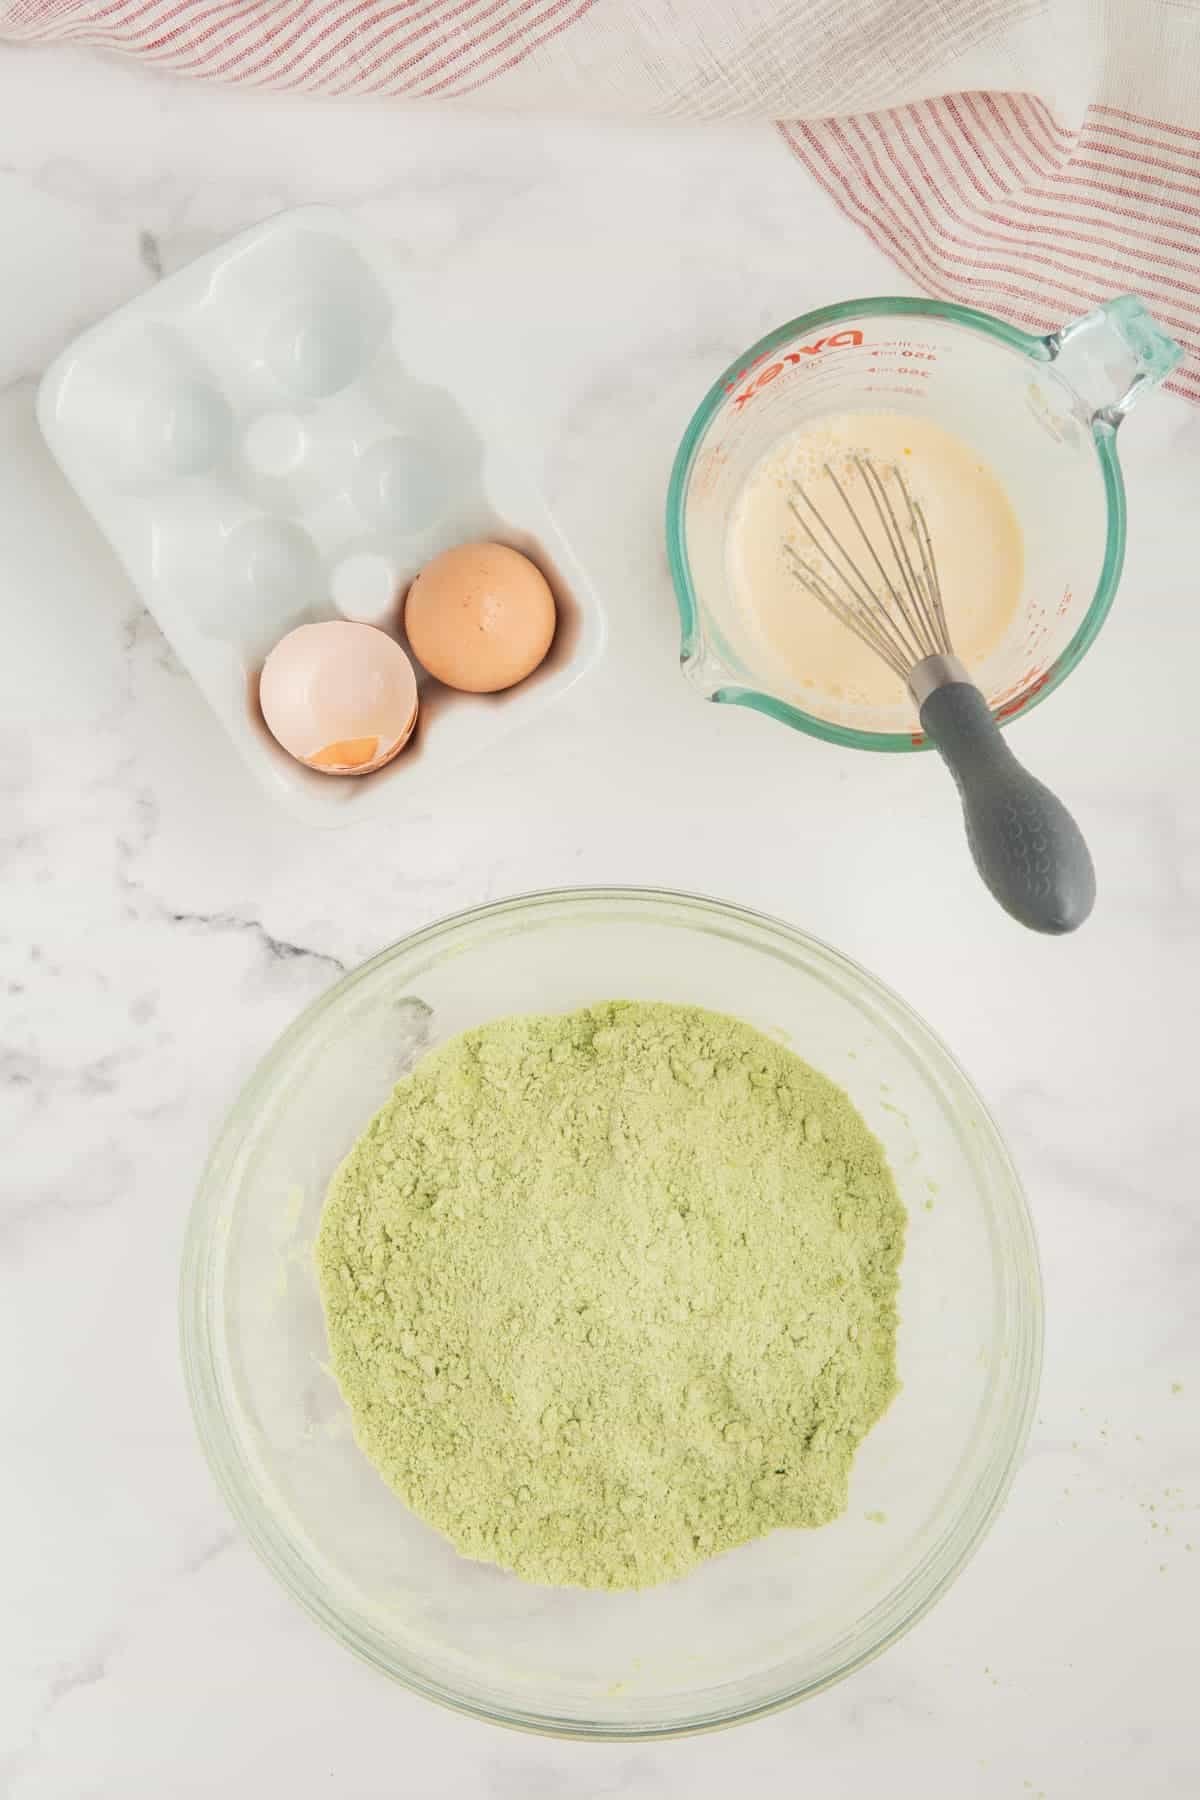 Butter mixed through the dry ingredients for matcha scones.